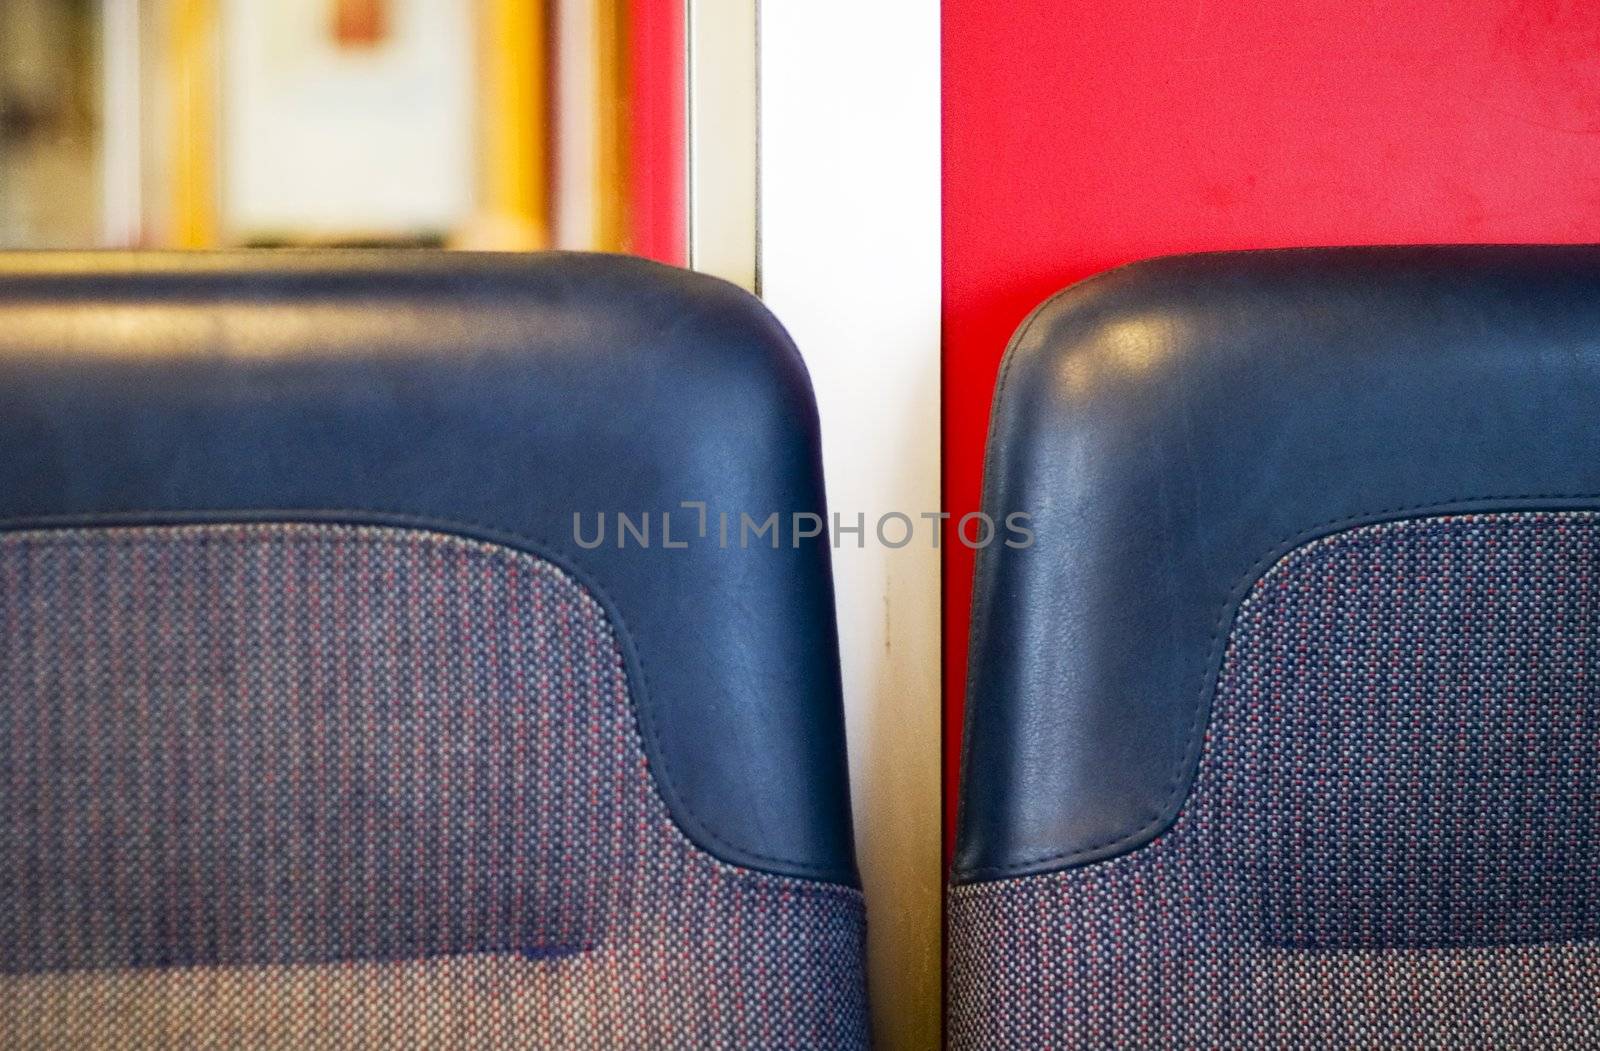 A train seat abstract with dominant blue and red colors.